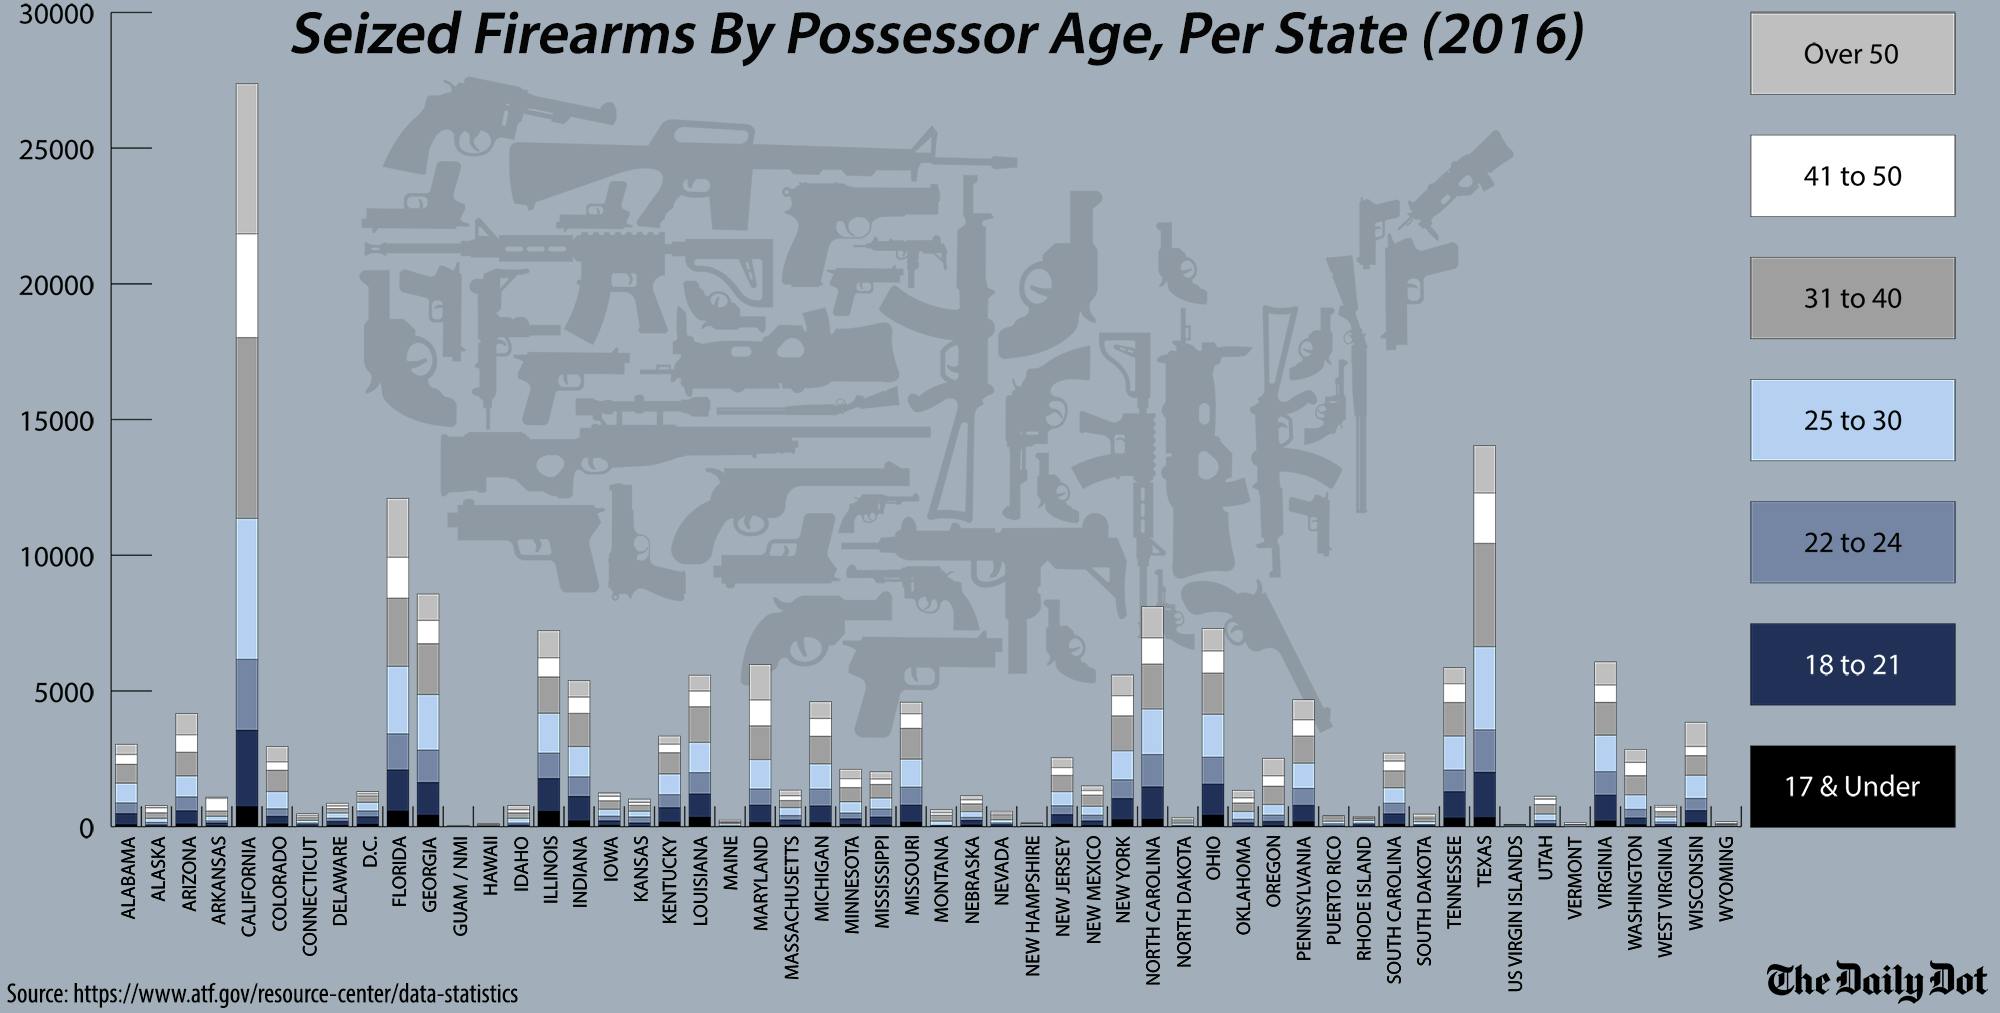 Seized Firearms By Possessor Age, Per State (2016) infographic